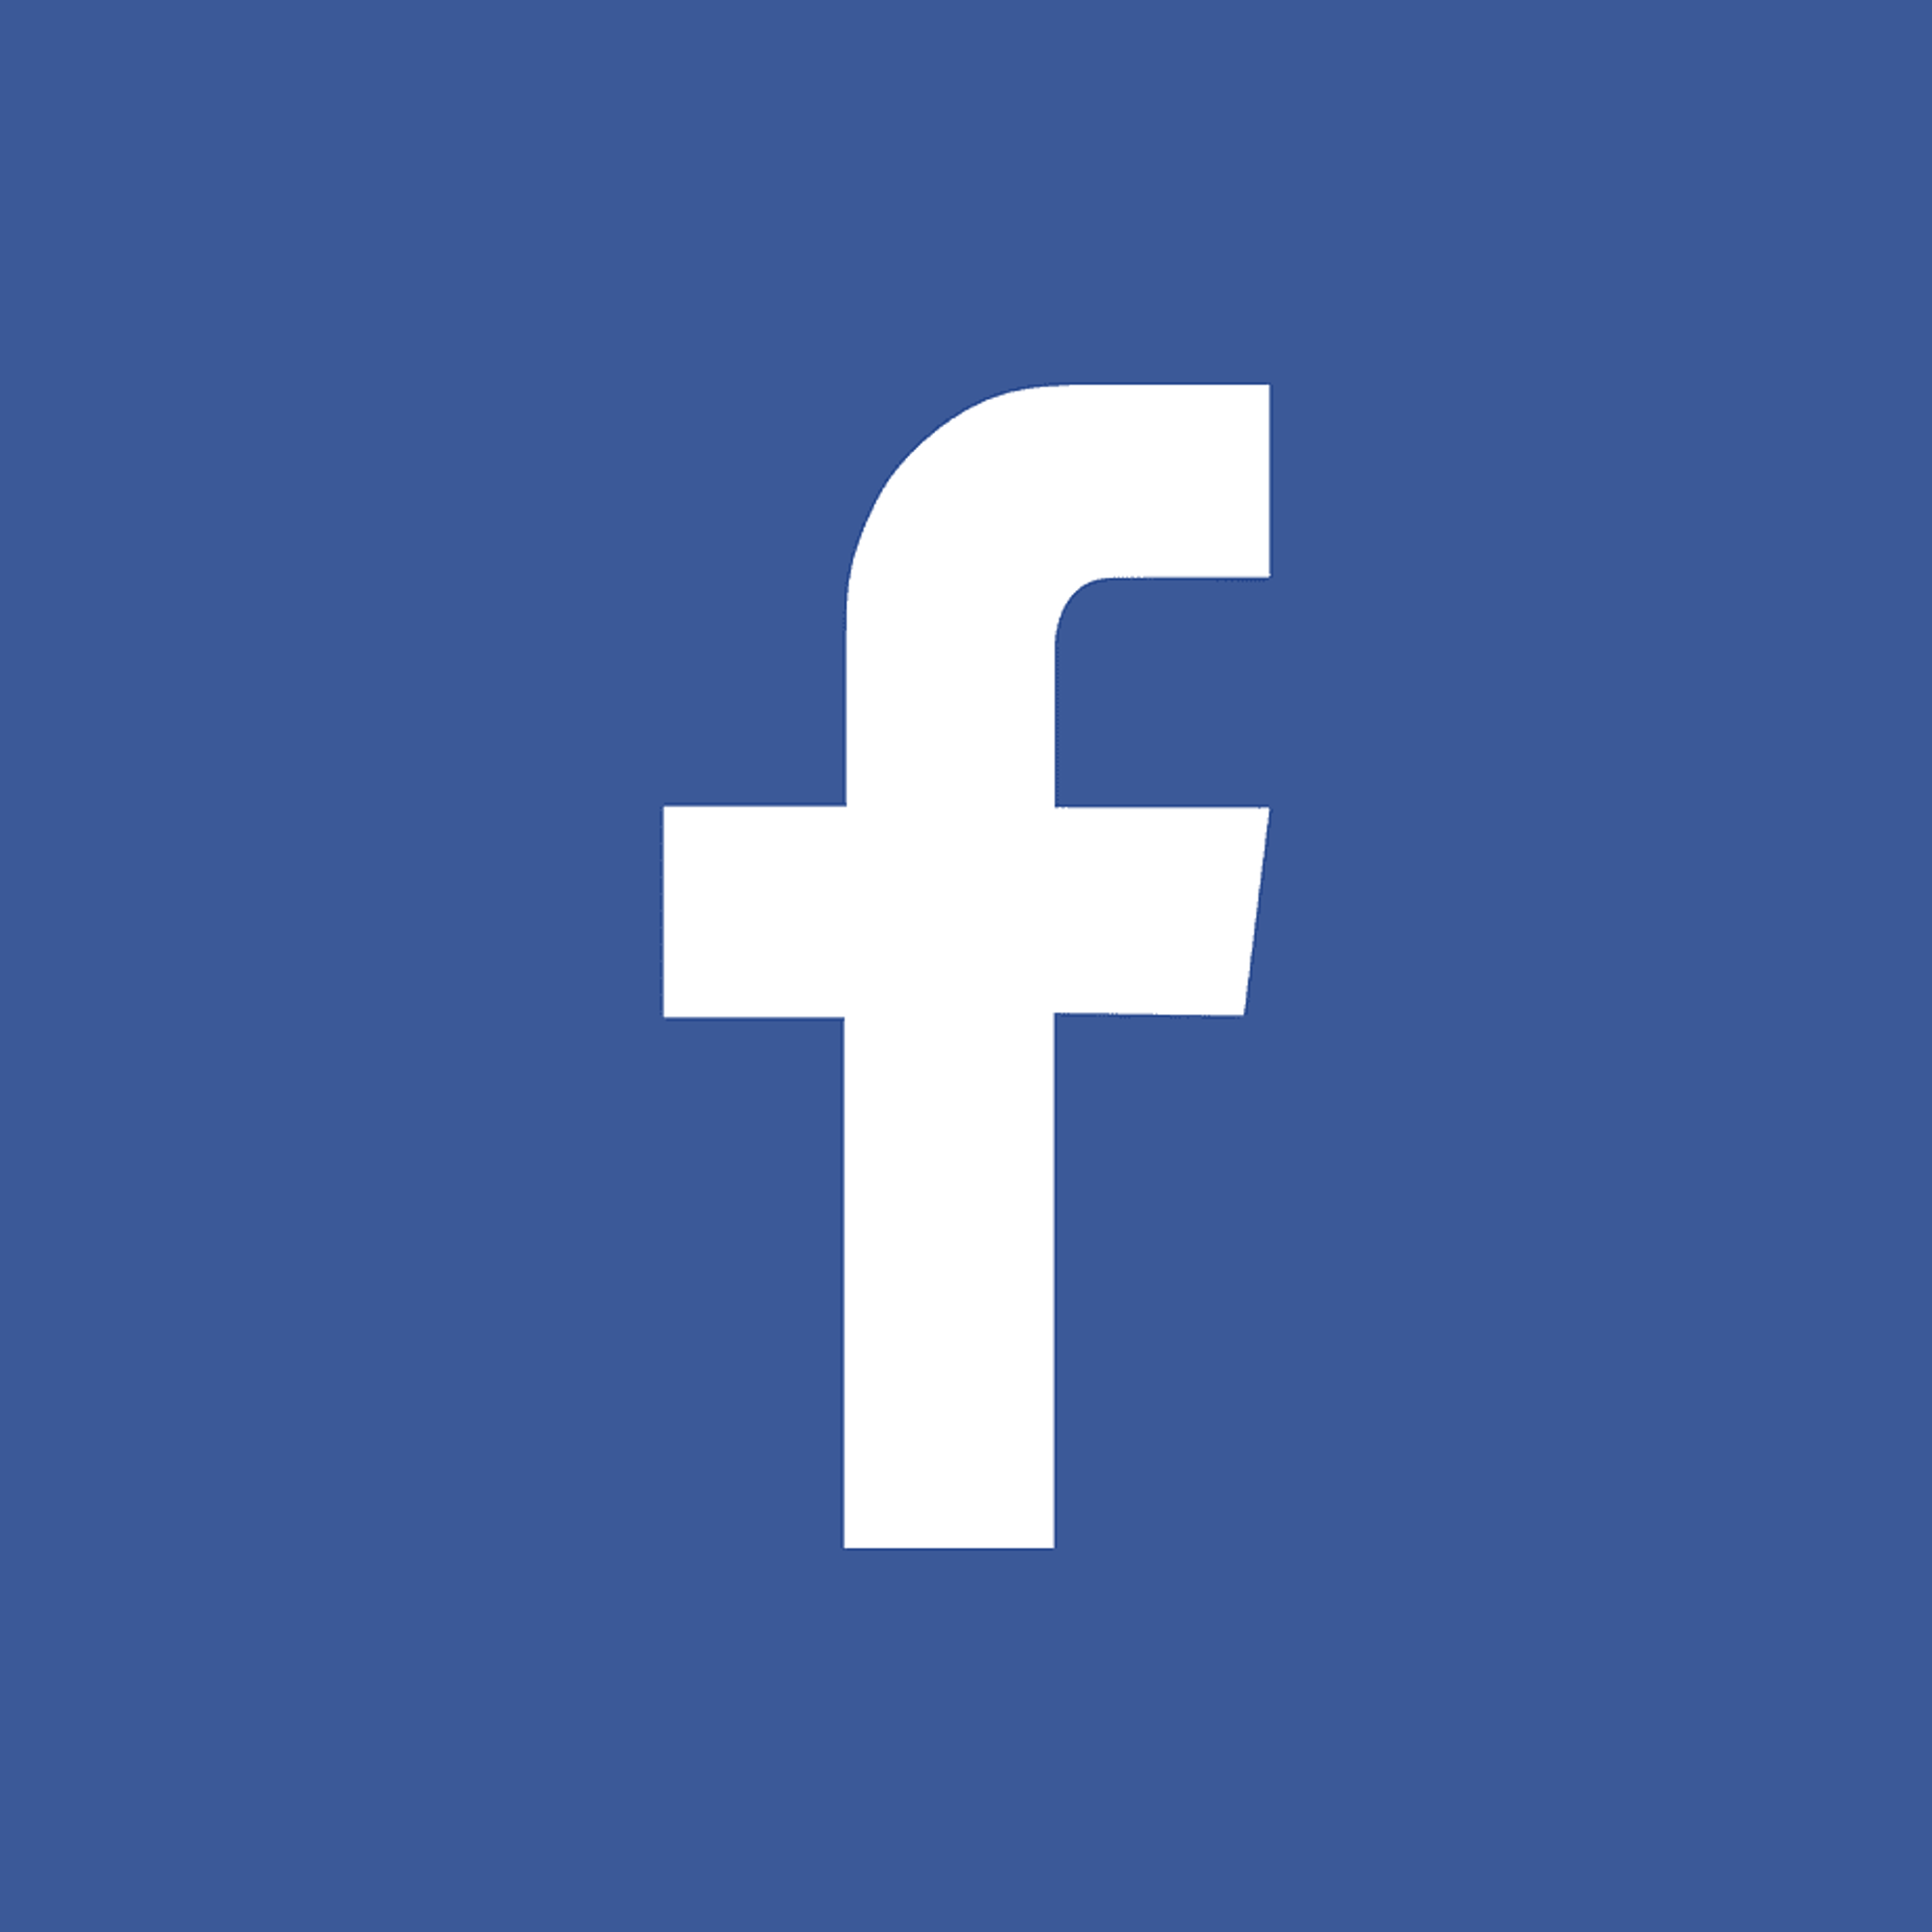 png-transparent-colored-facebook-high-quality-media-social-social-media-square-social-media-square-flat-icon.png